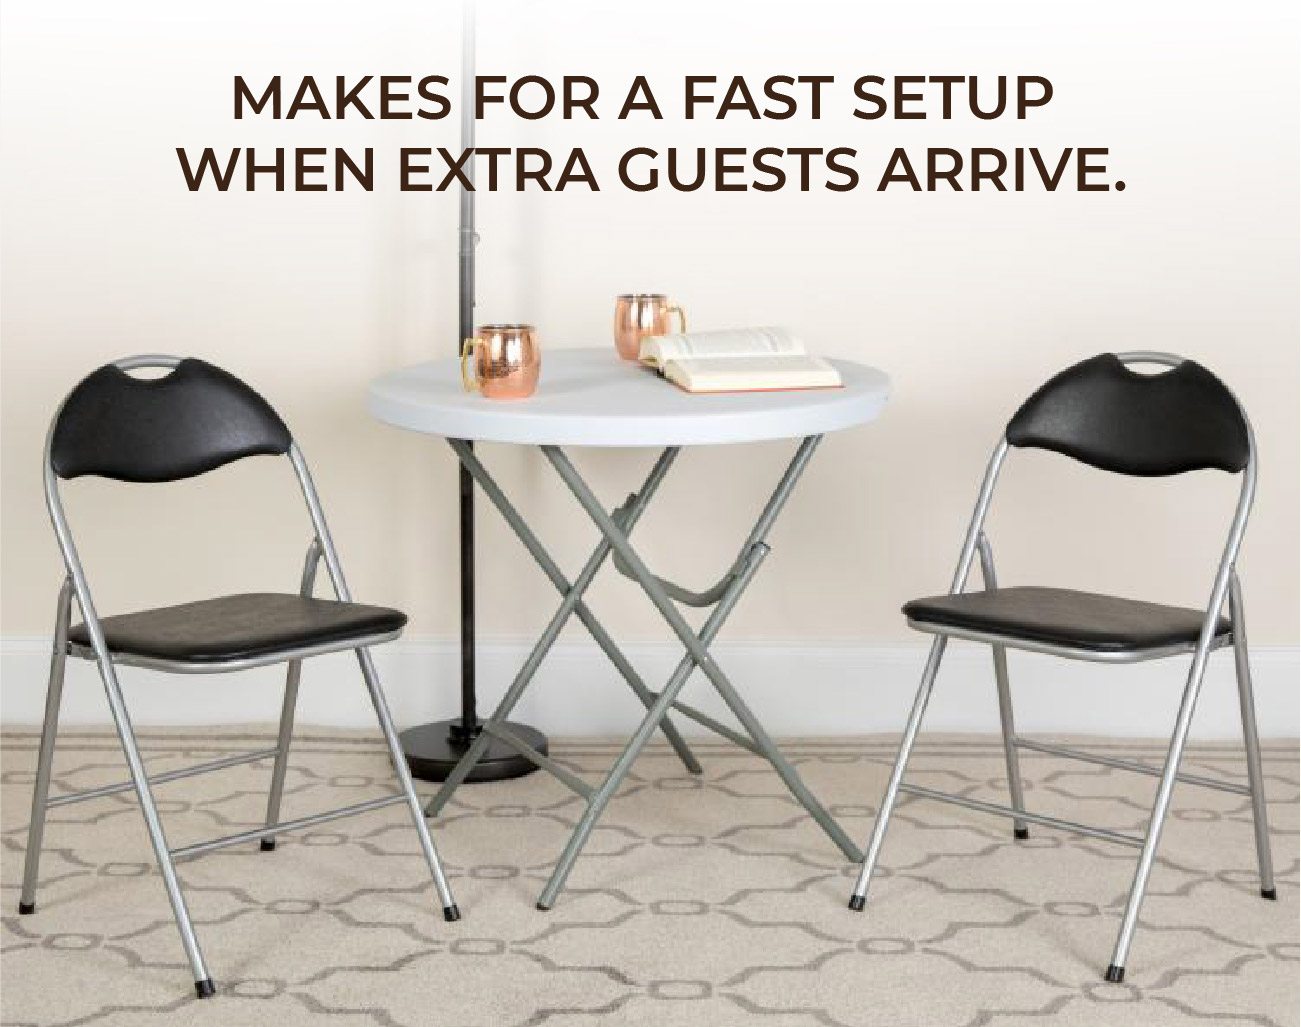 Makes for fast setup when extra guests arrive.